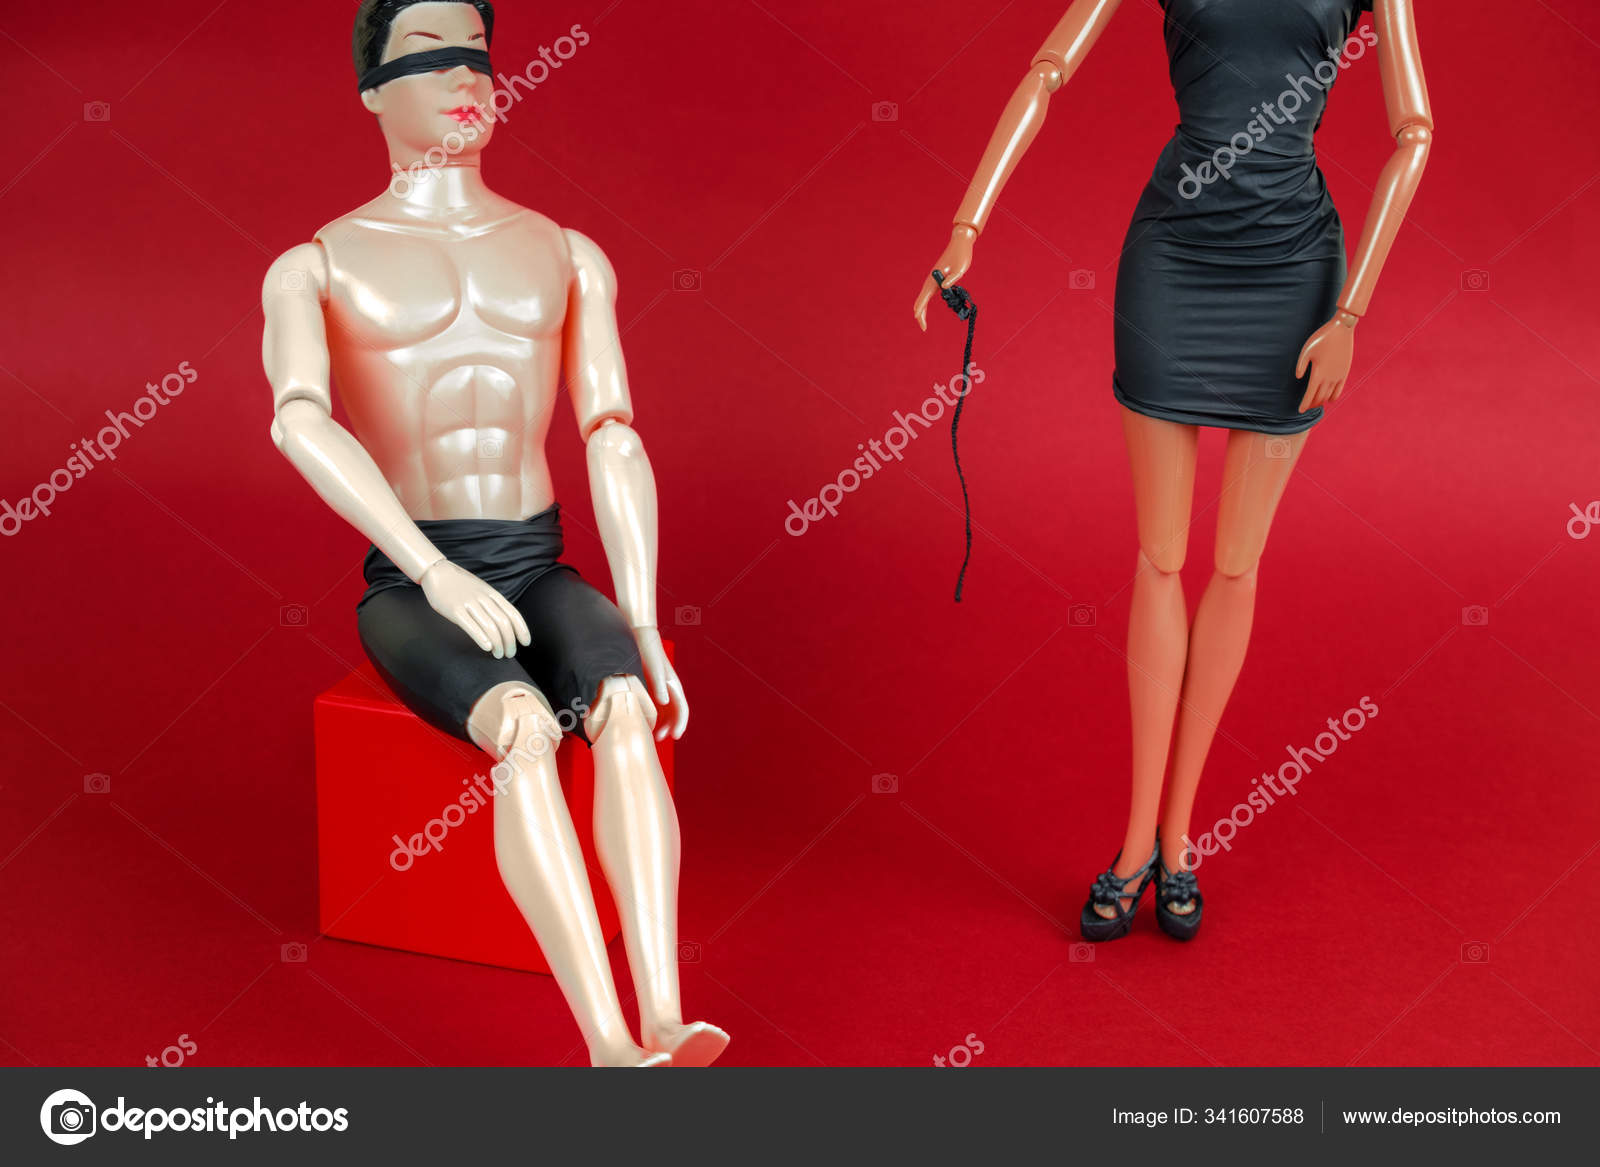 Blindfolded Man Woman Black Leather Dress Holding Whip Red Background Stock Photo by ©dvulikaia 341607588